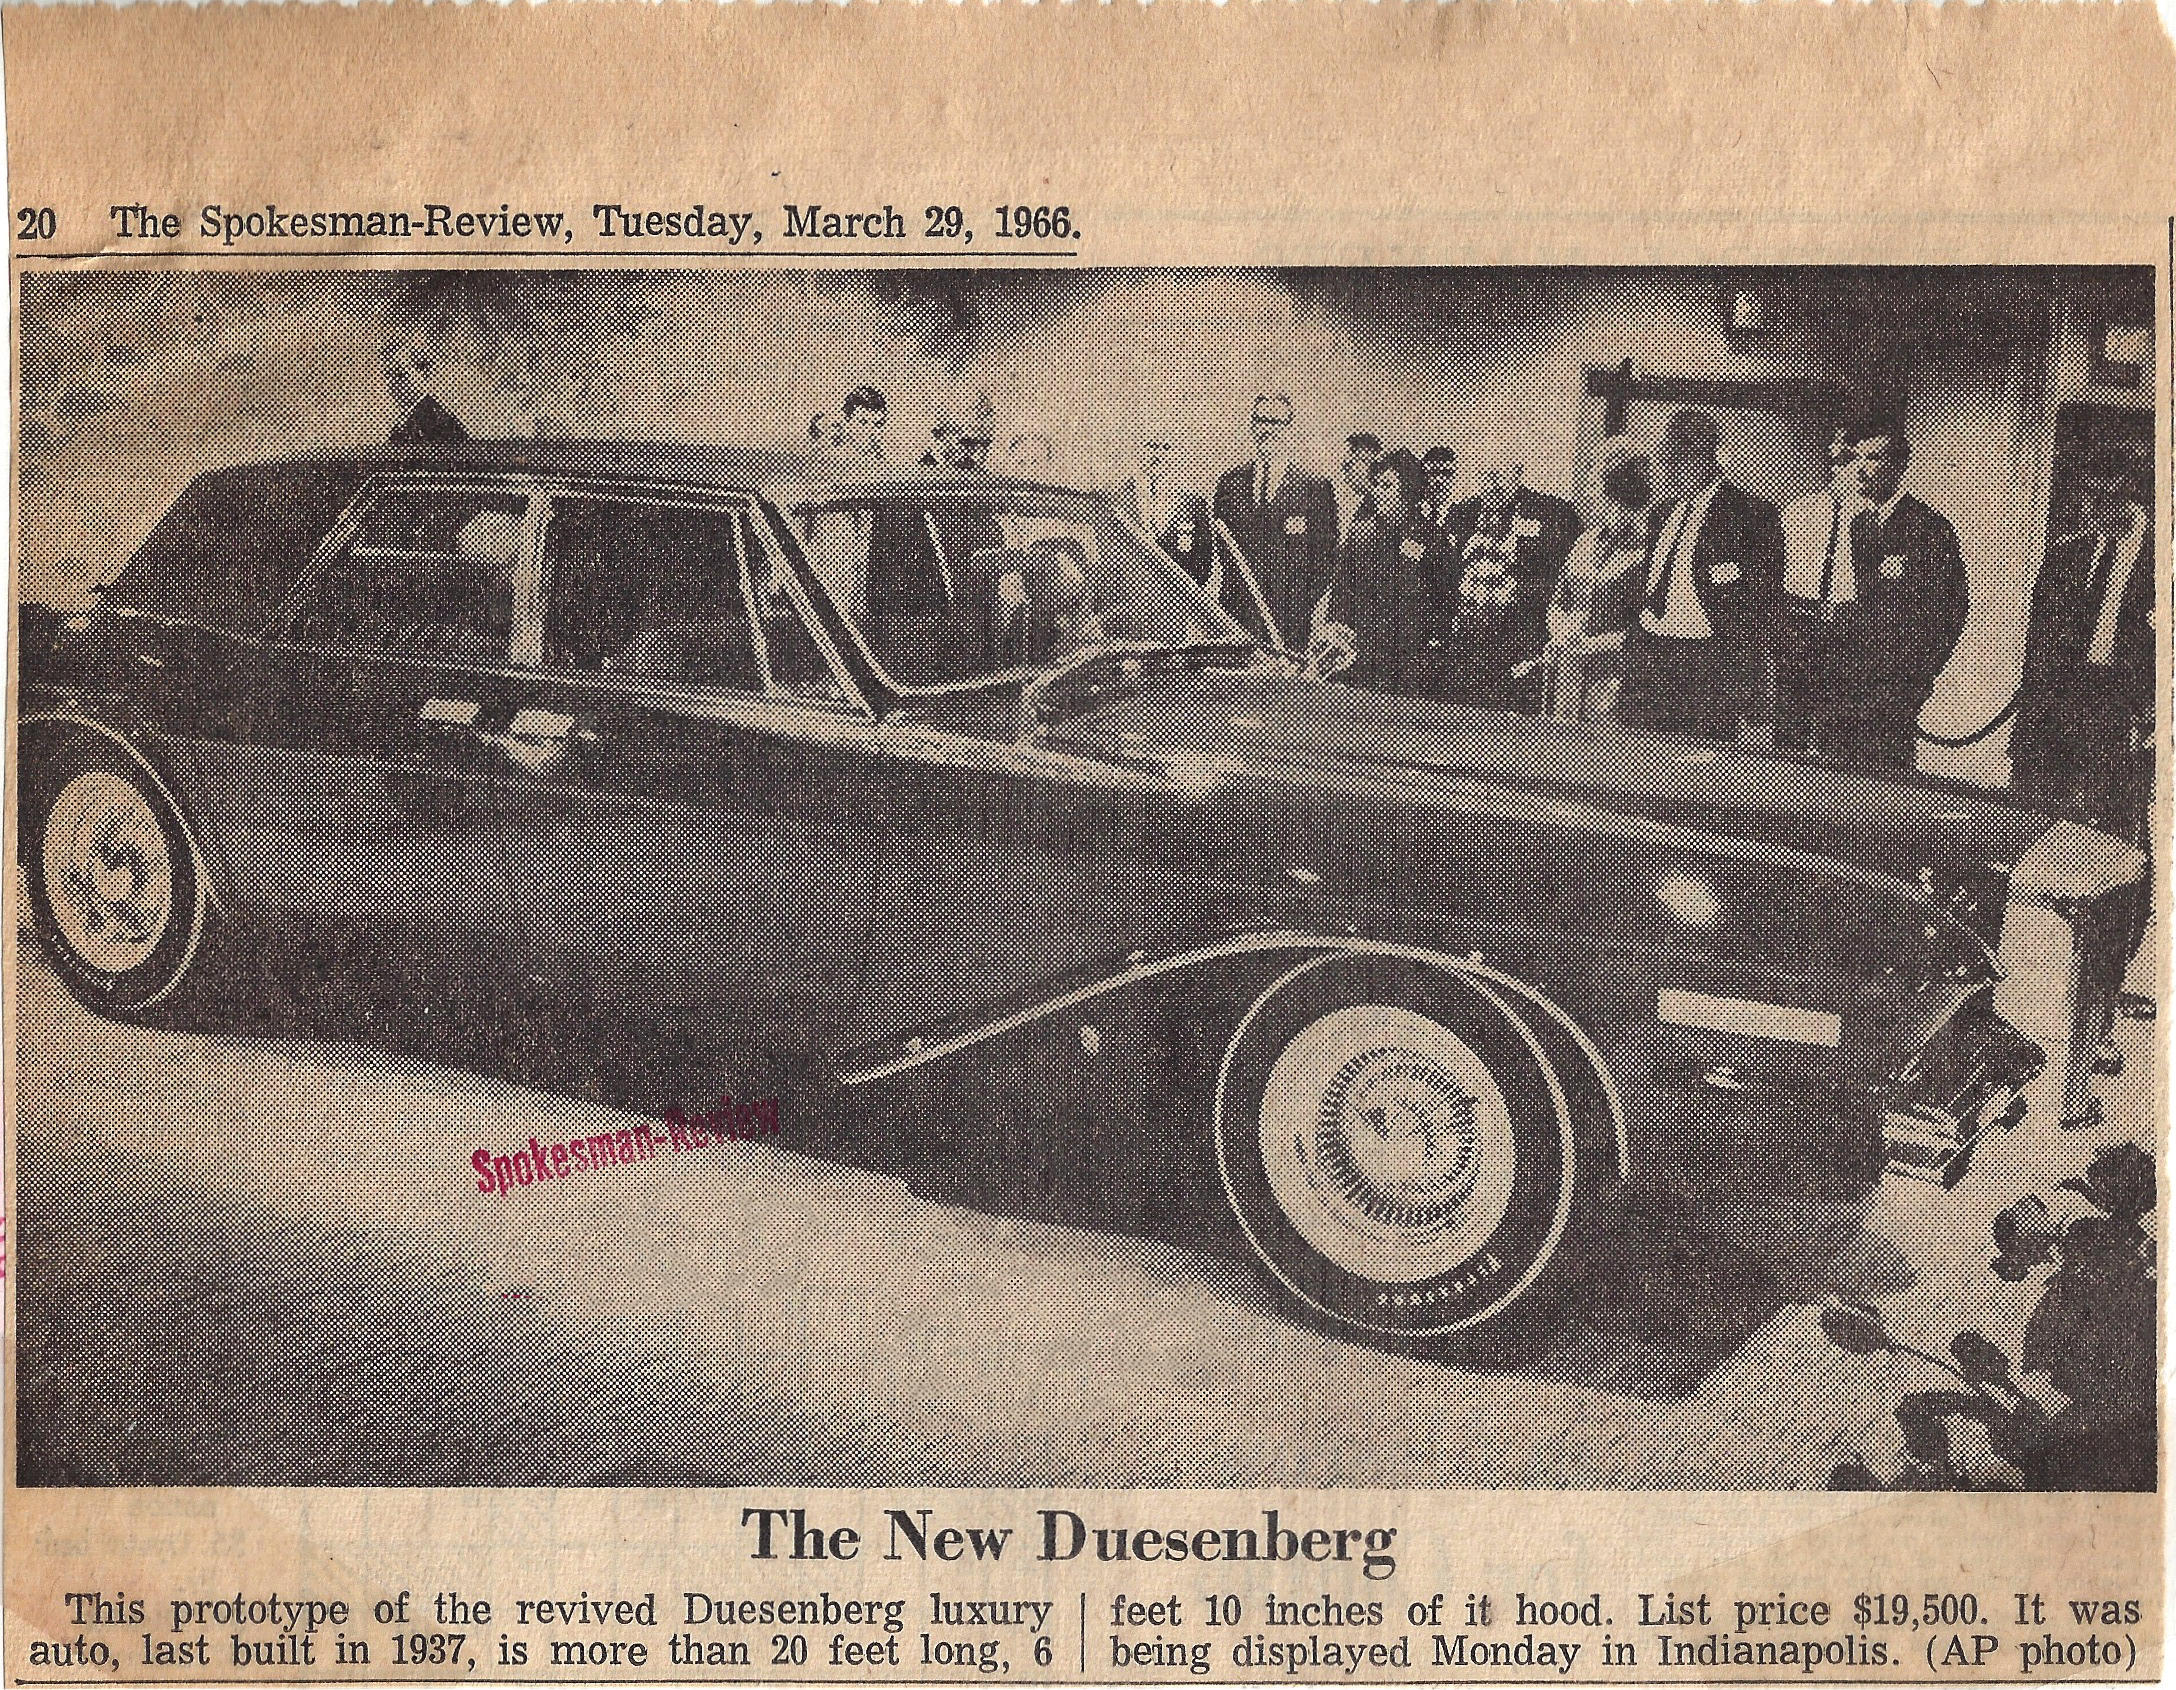 The New Duesenberg, The Spokesman-Review, March 29, 1966